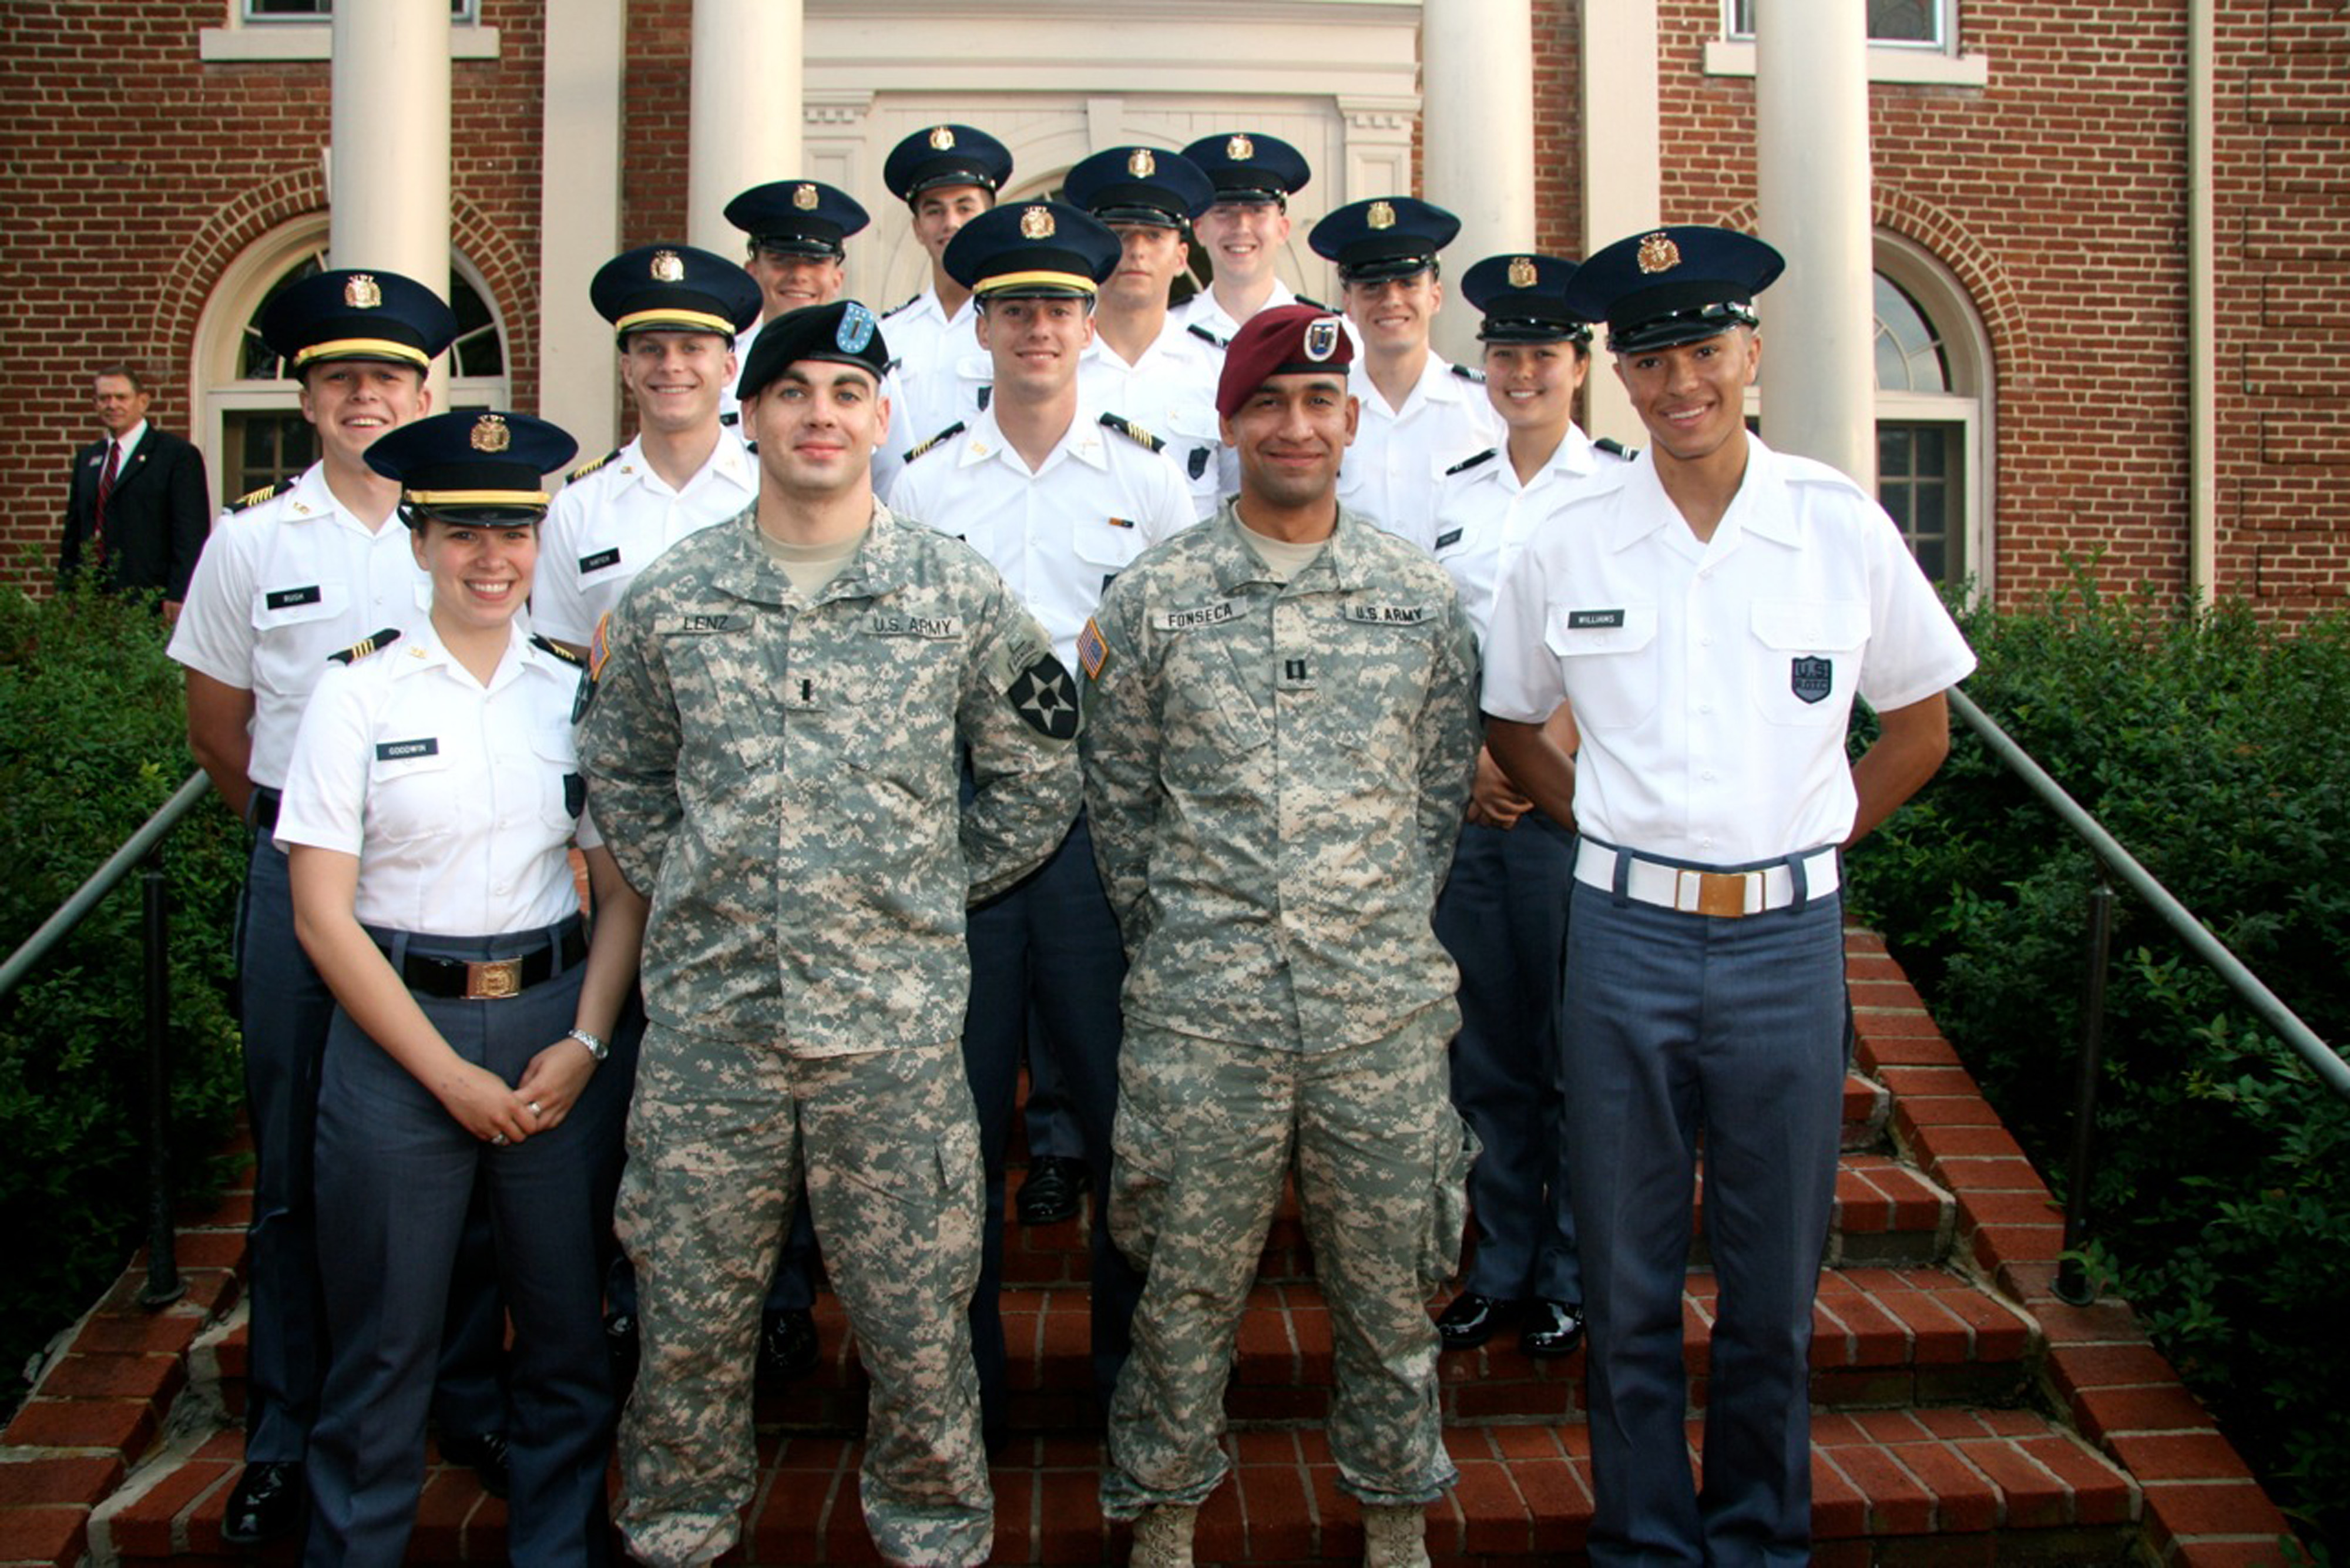 1st Lt. Thomas Lenz (center, left), U.S. Army, Virginia Tech Corps of Cadets Class of 2008 and Capt. Roberto Fonseca (center, right), U.S. Army, Virginia Tech Corps of Cadets Class of 2004, previous Gunfighter panelists standing with members of the Corps of Cadets